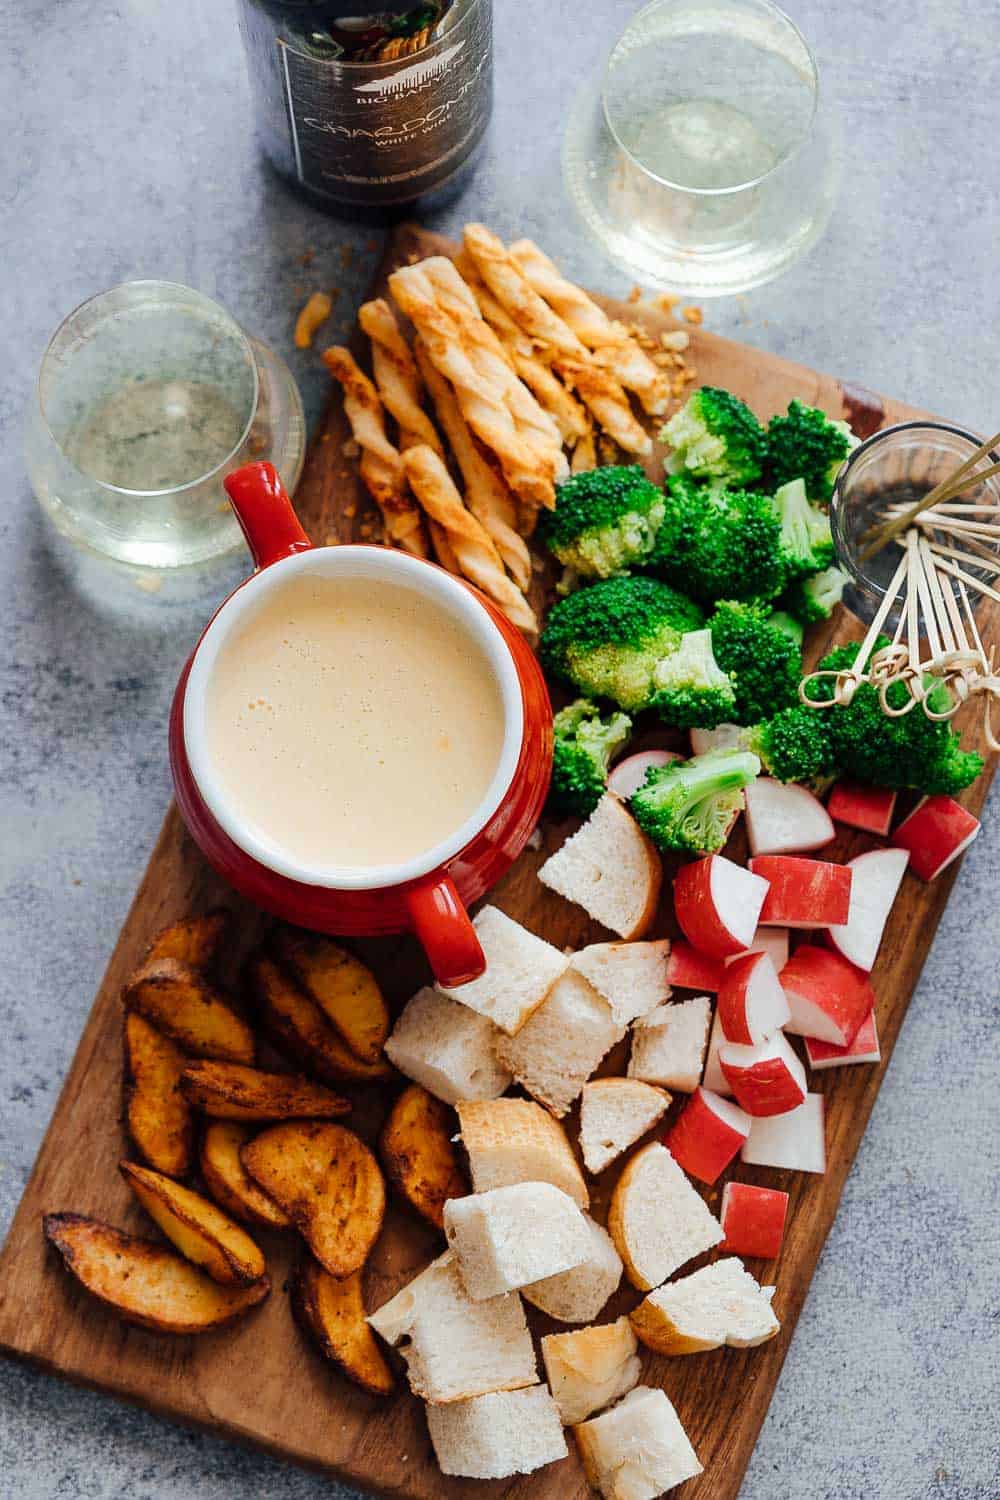 Easy cheese fondue recipe with white wine picture with fondue dippers such as bread, broccoli, wedges, radishes, bread sticks etc.